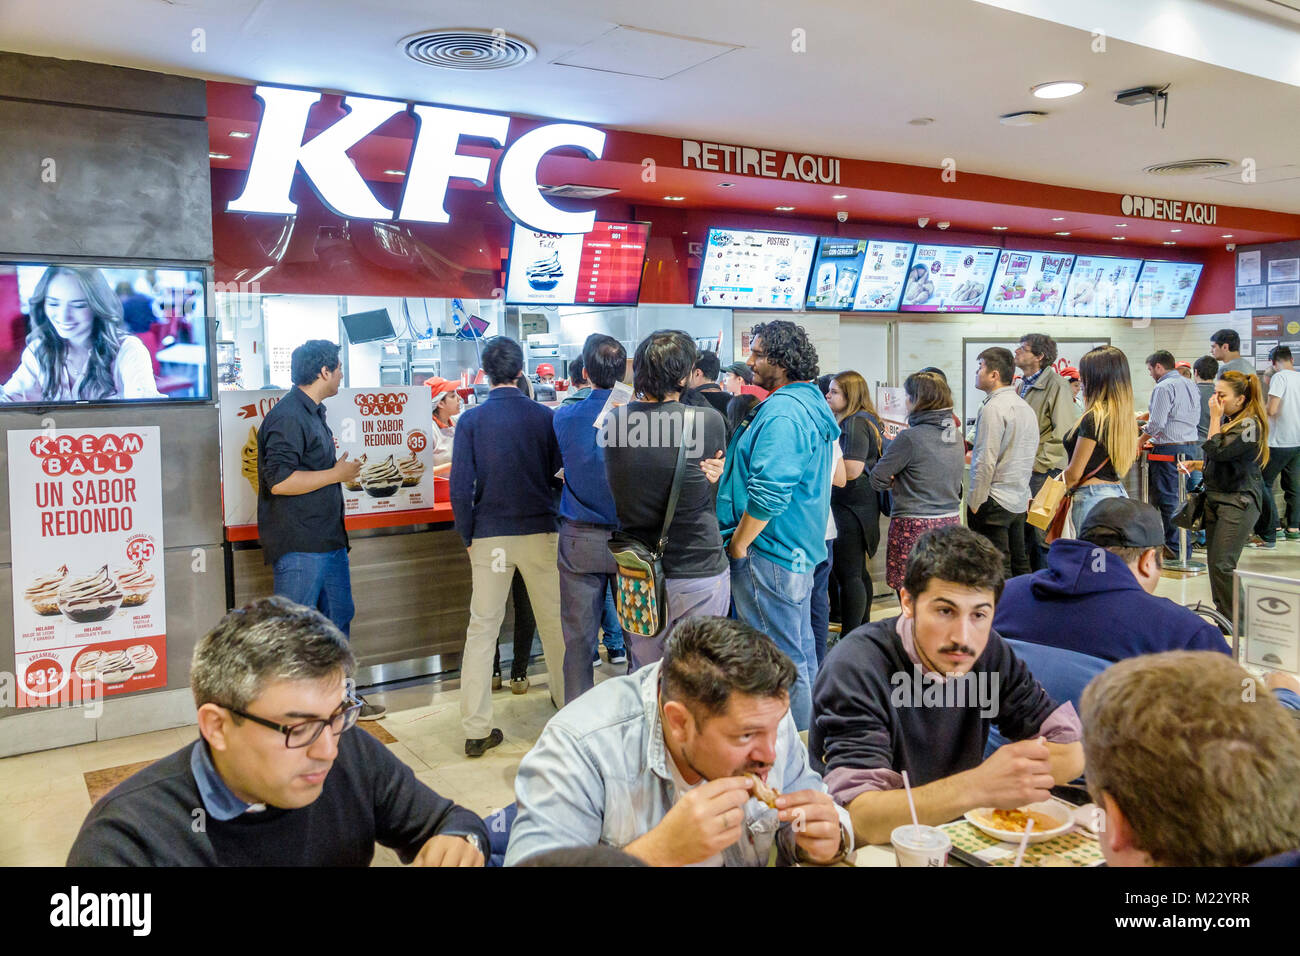 Buenos Aires Argentina,Galerias Pacifico mall,food court plaza,KFC,American chicken restaurant,counter,fast food,line,Hispanic,man men male,eating,Arg Stock Photo